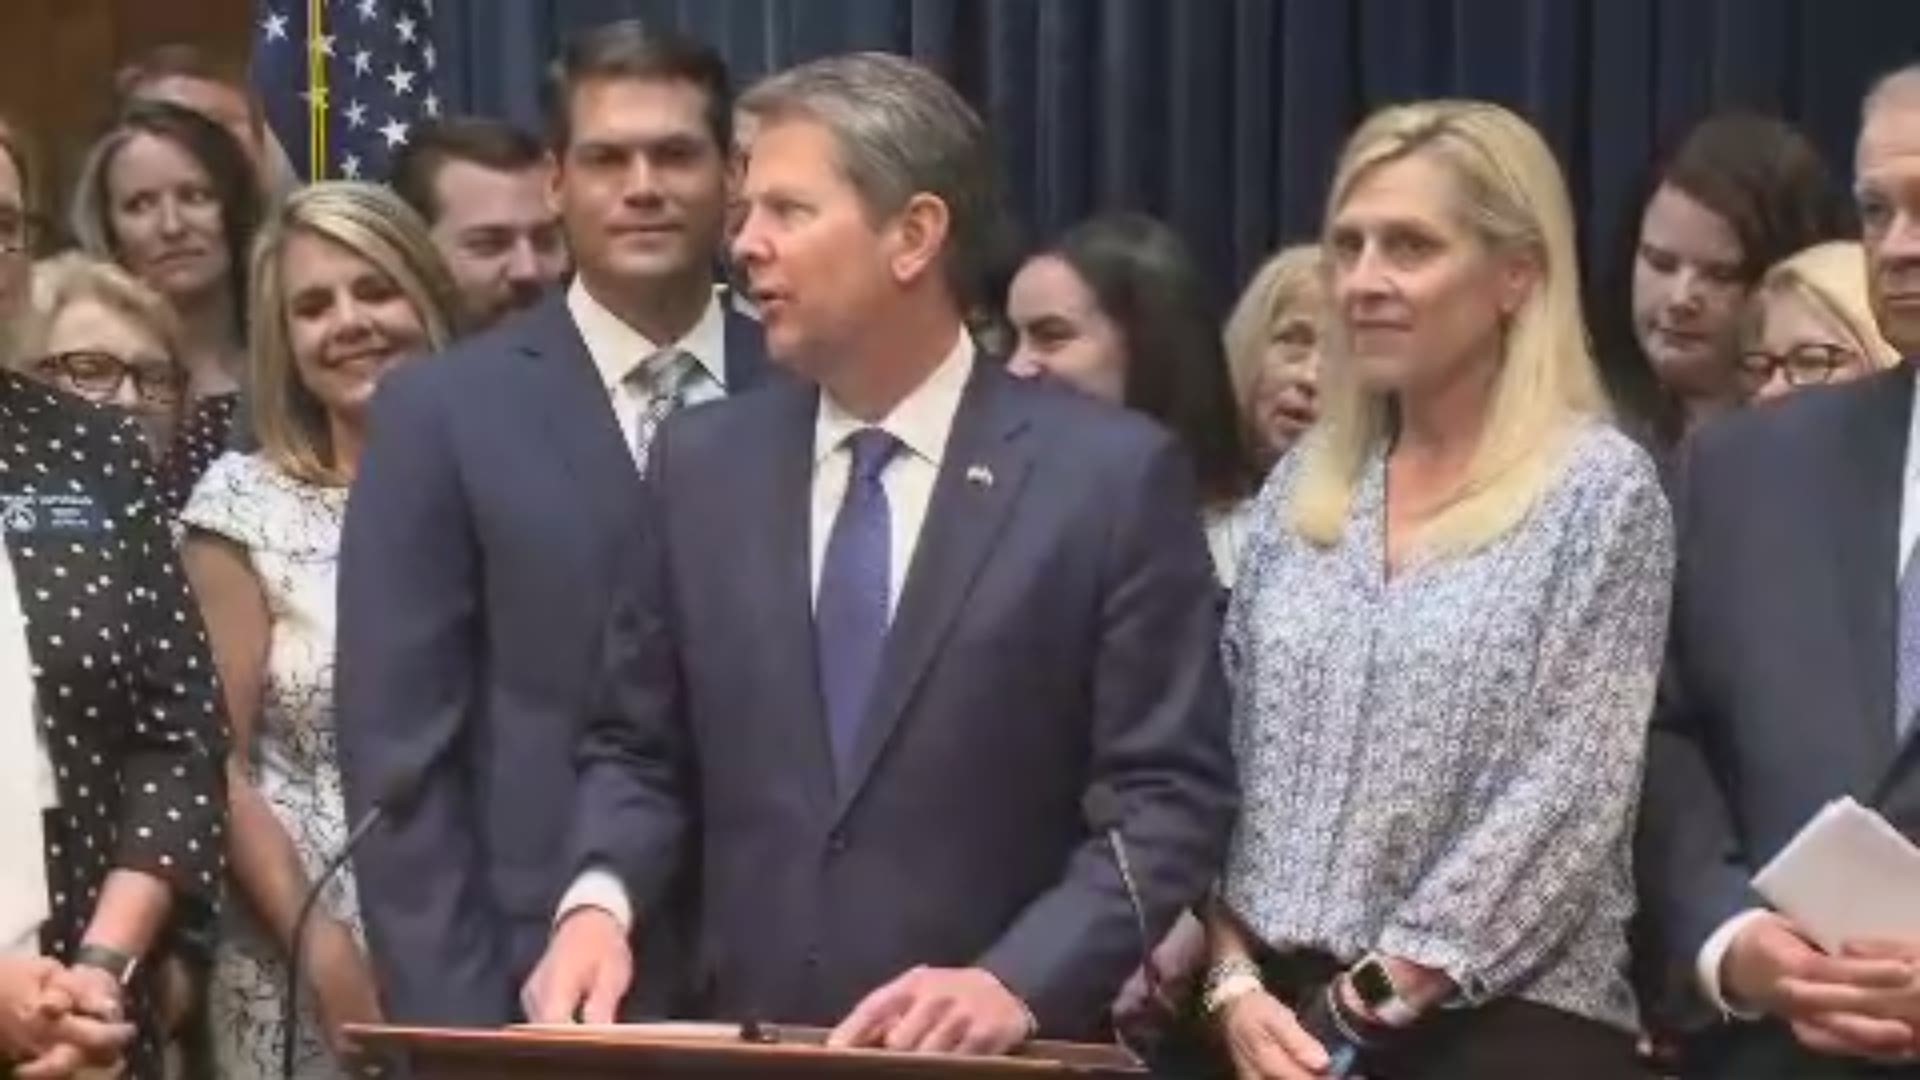 During the signing, Gov. Kemp said Georgia is a state that values all life.